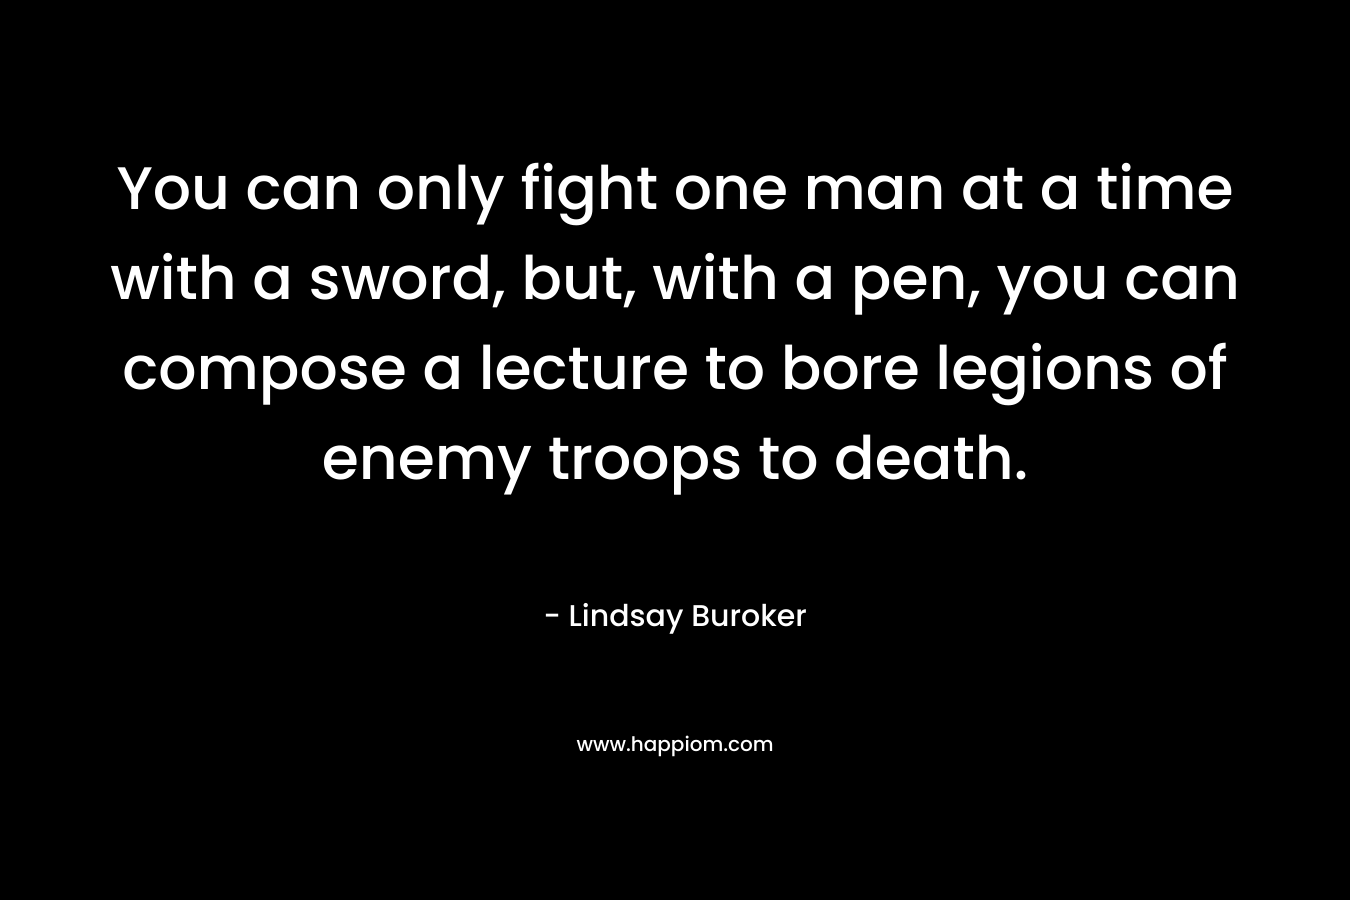 You can only fight one man at a time with a sword, but, with a pen, you can compose a lecture to bore legions of enemy troops to death.